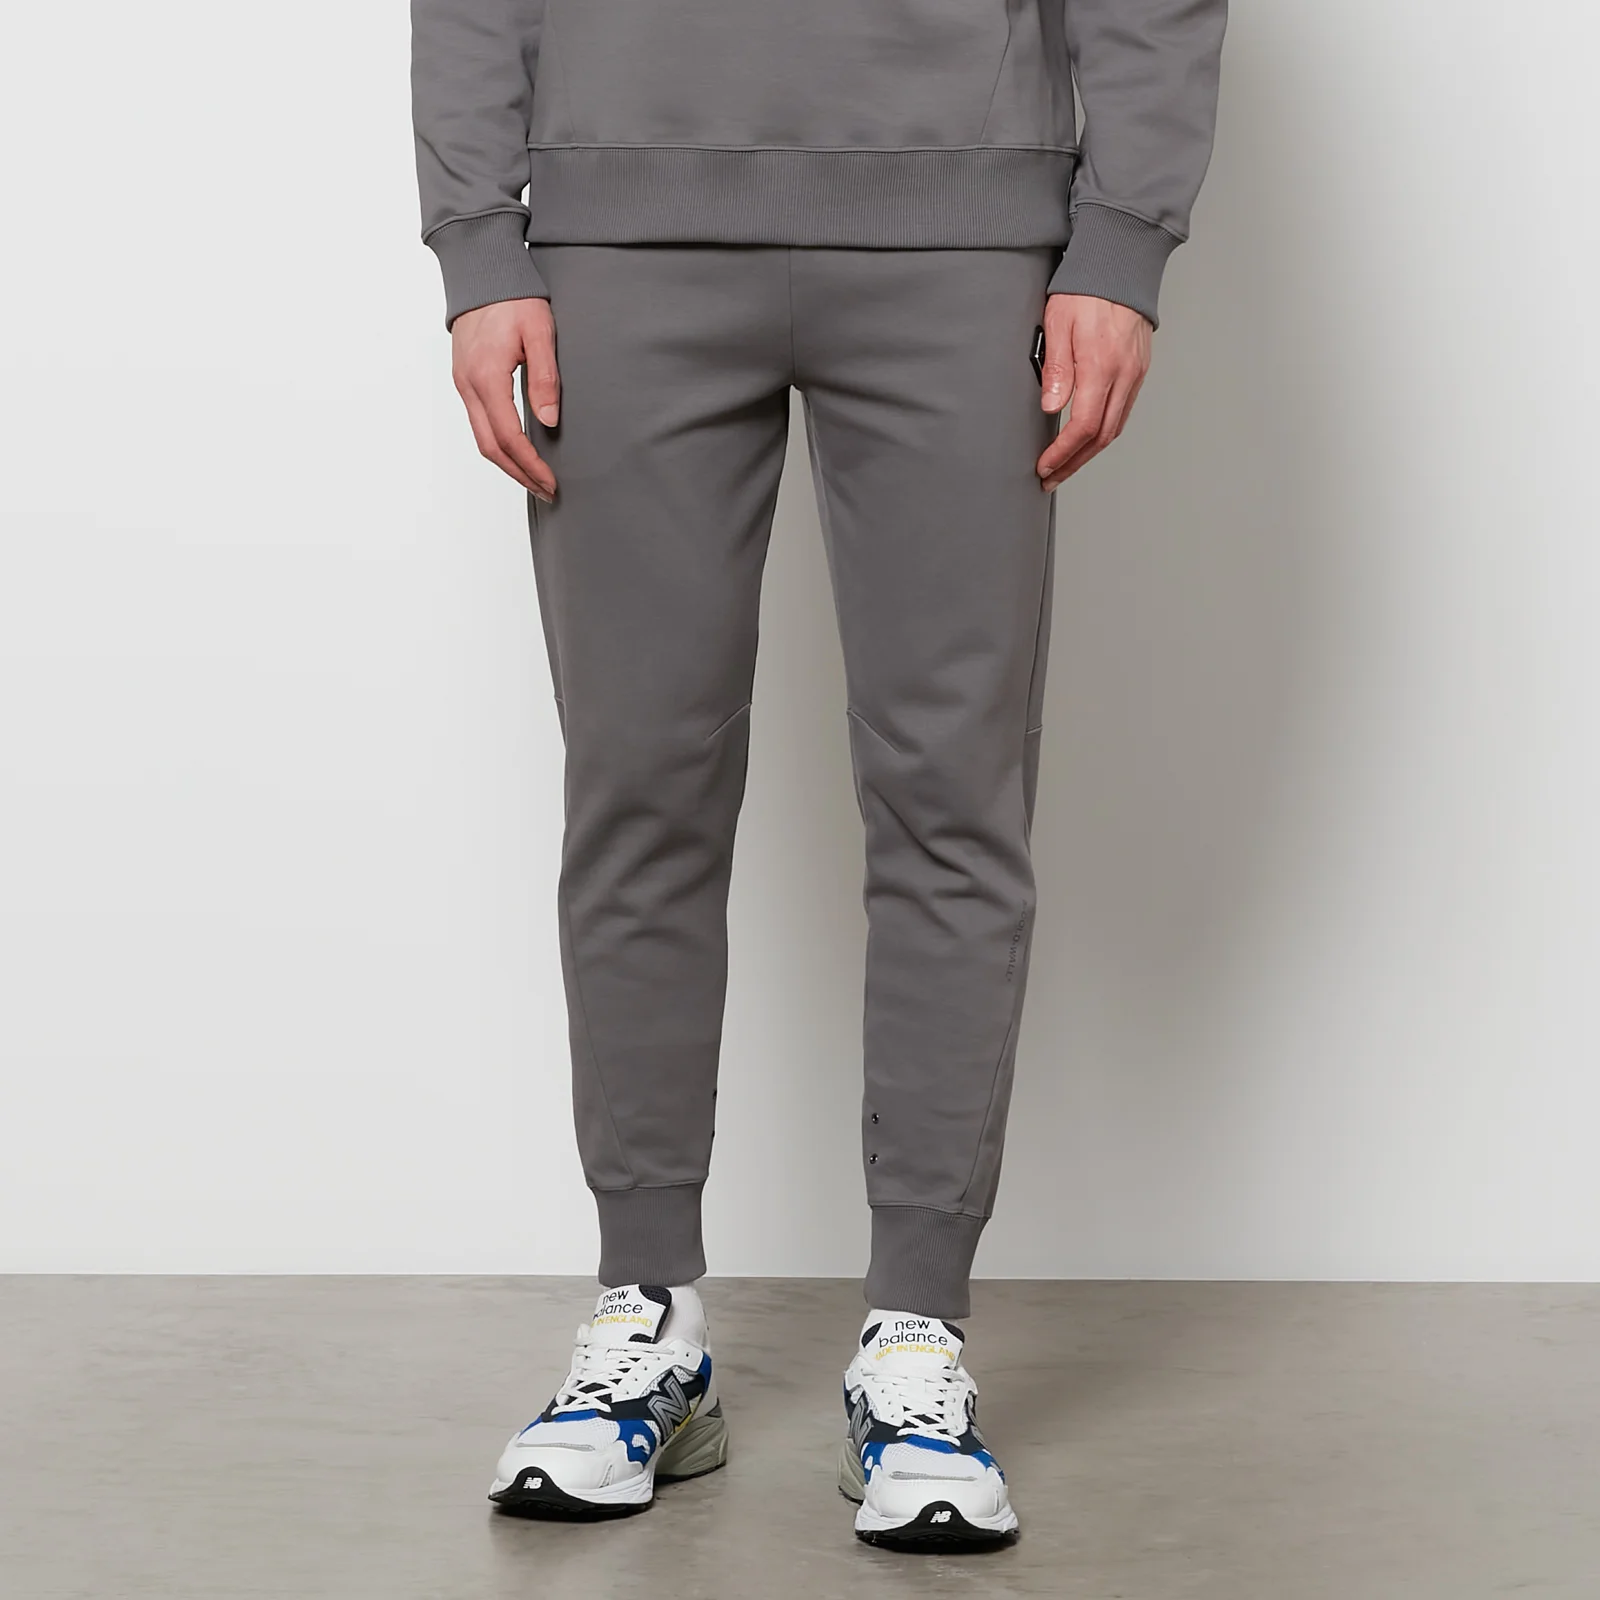 A-COLD-WALL* Men's Reflector Tracksuit Pants - Mid Grey Image 1